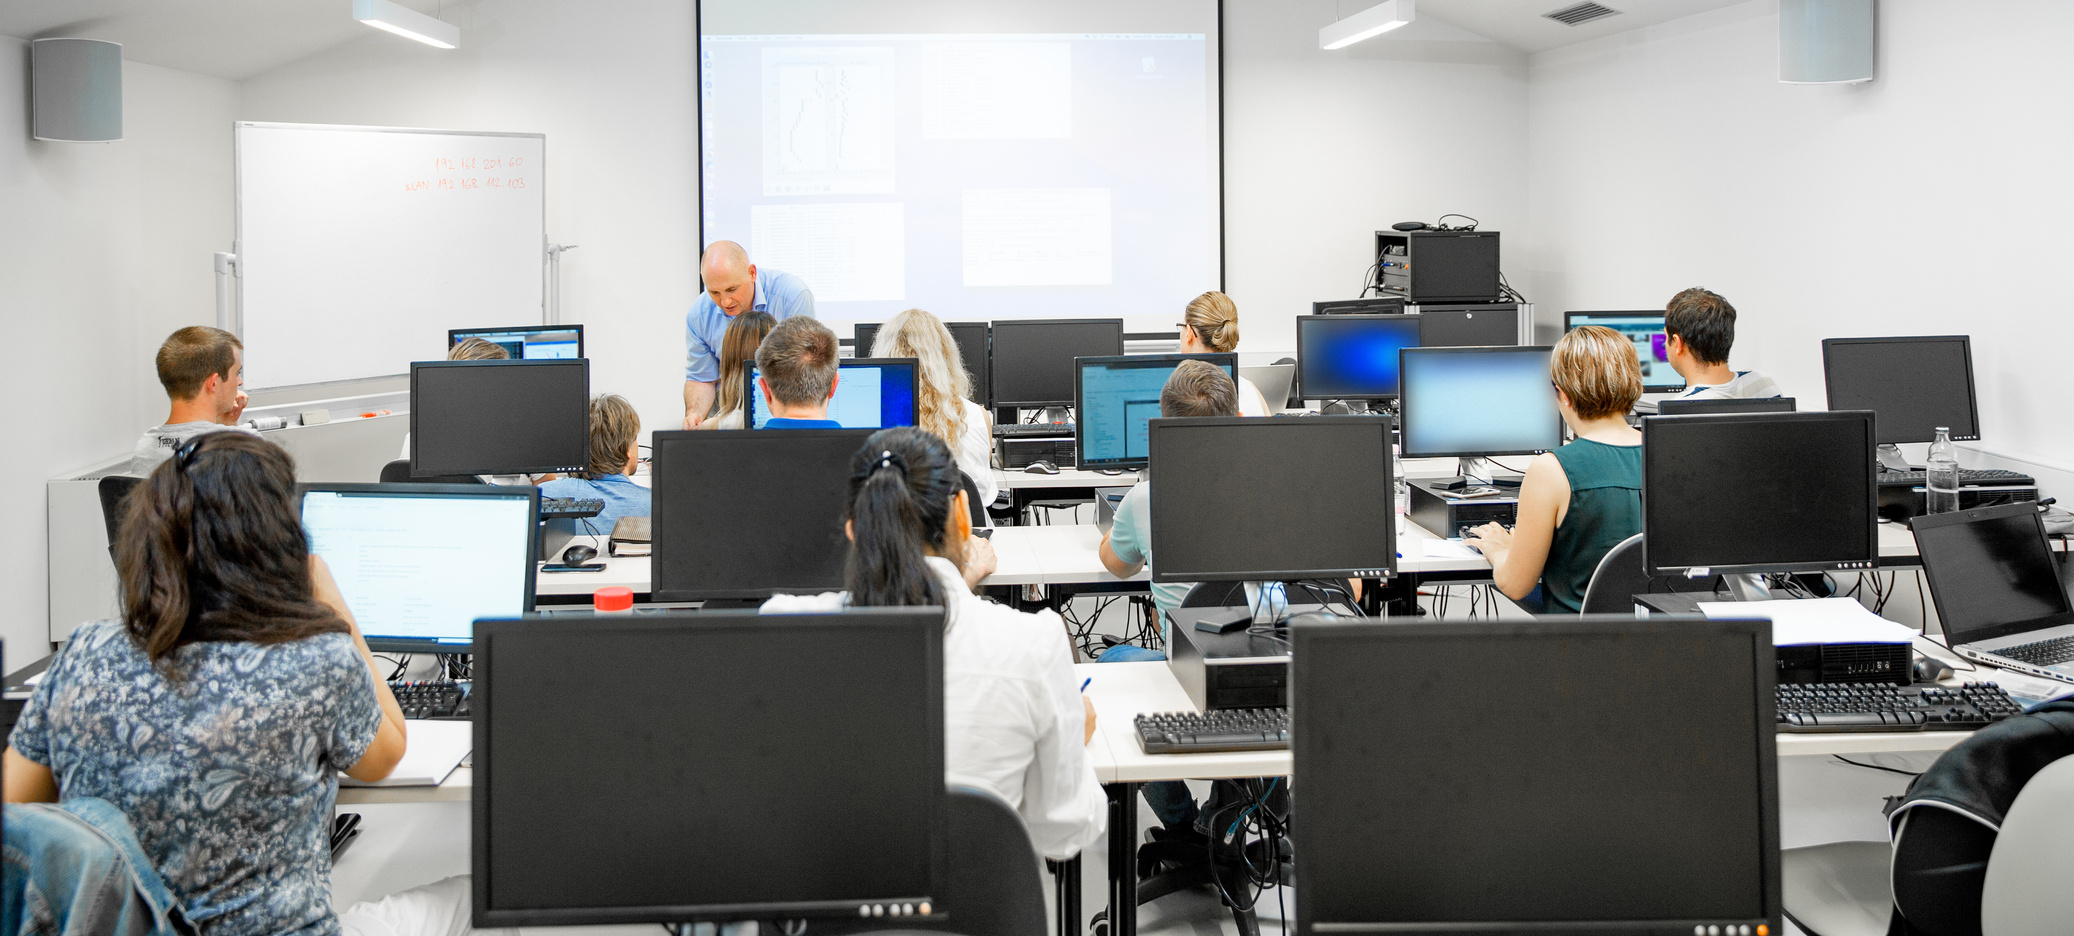 Adult Students Using Computers in Classroom